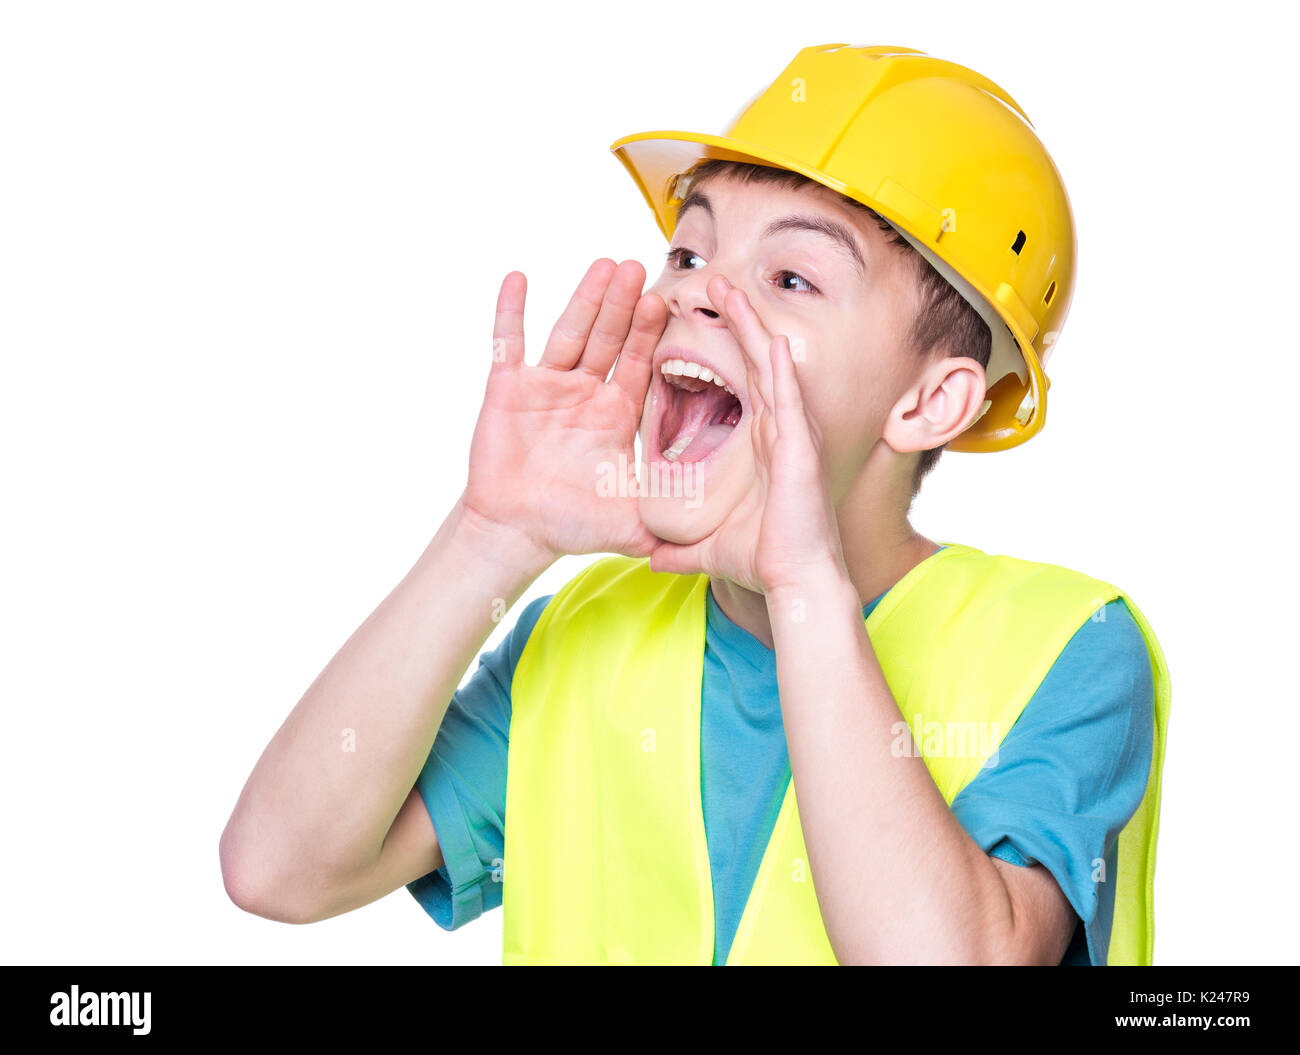 Emotional portrait of handsome caucasian teen boy wearing safety jacket and yellow hard hat. Happy child screaming and looking away, isolated on white Stock Photo